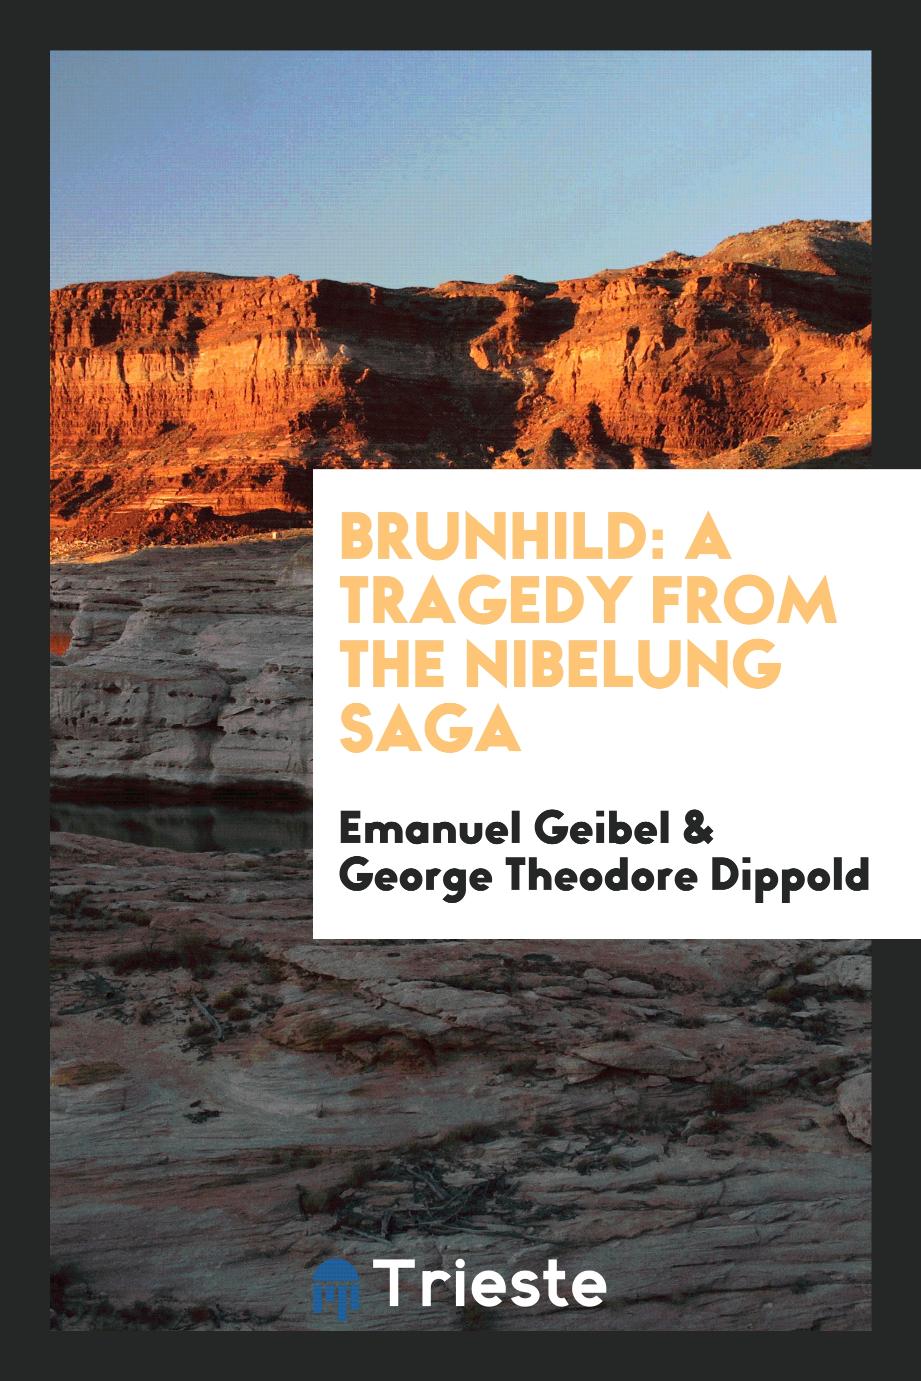 Brunhild: A Tragedy from the Nibelung Saga